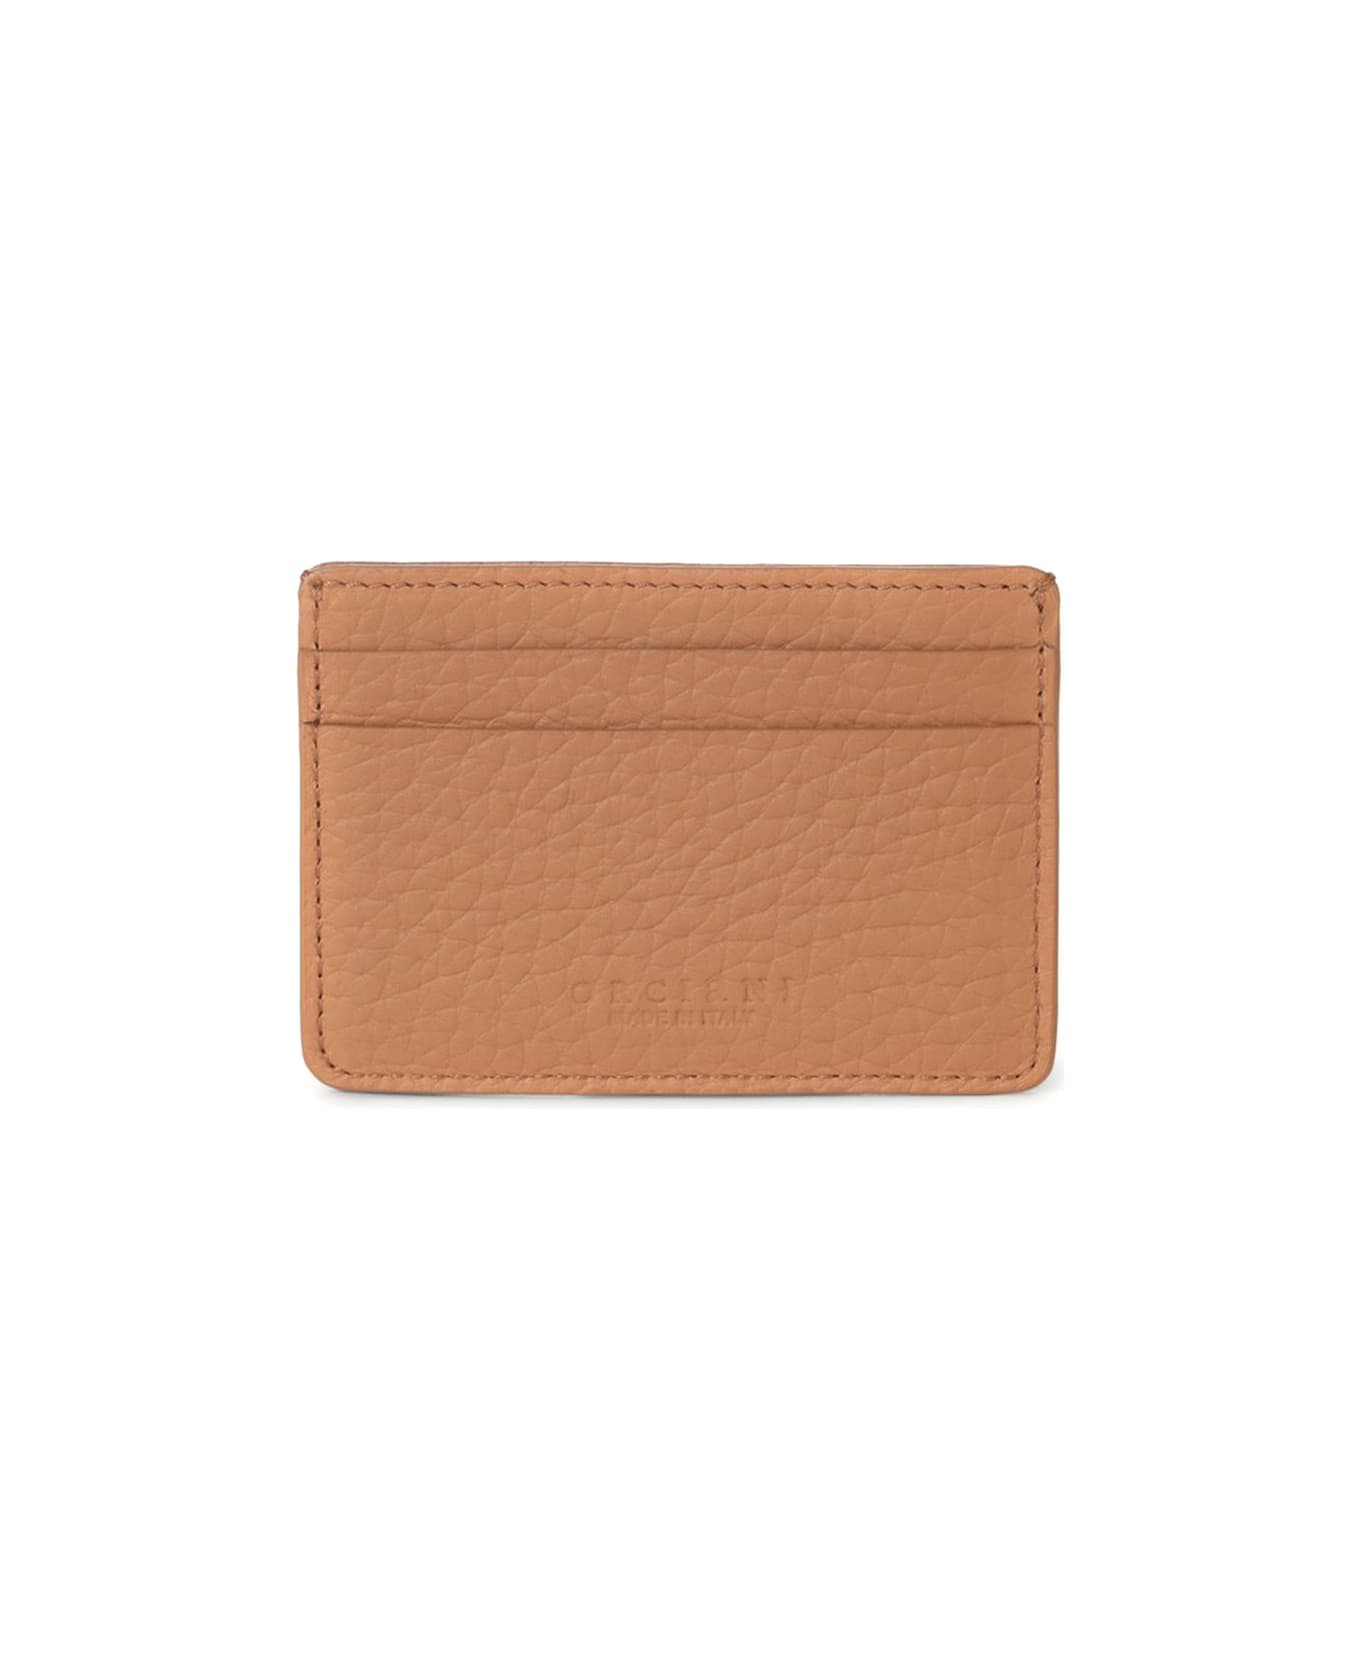 Orciani Brown Soft Leather Card Holder - Camel